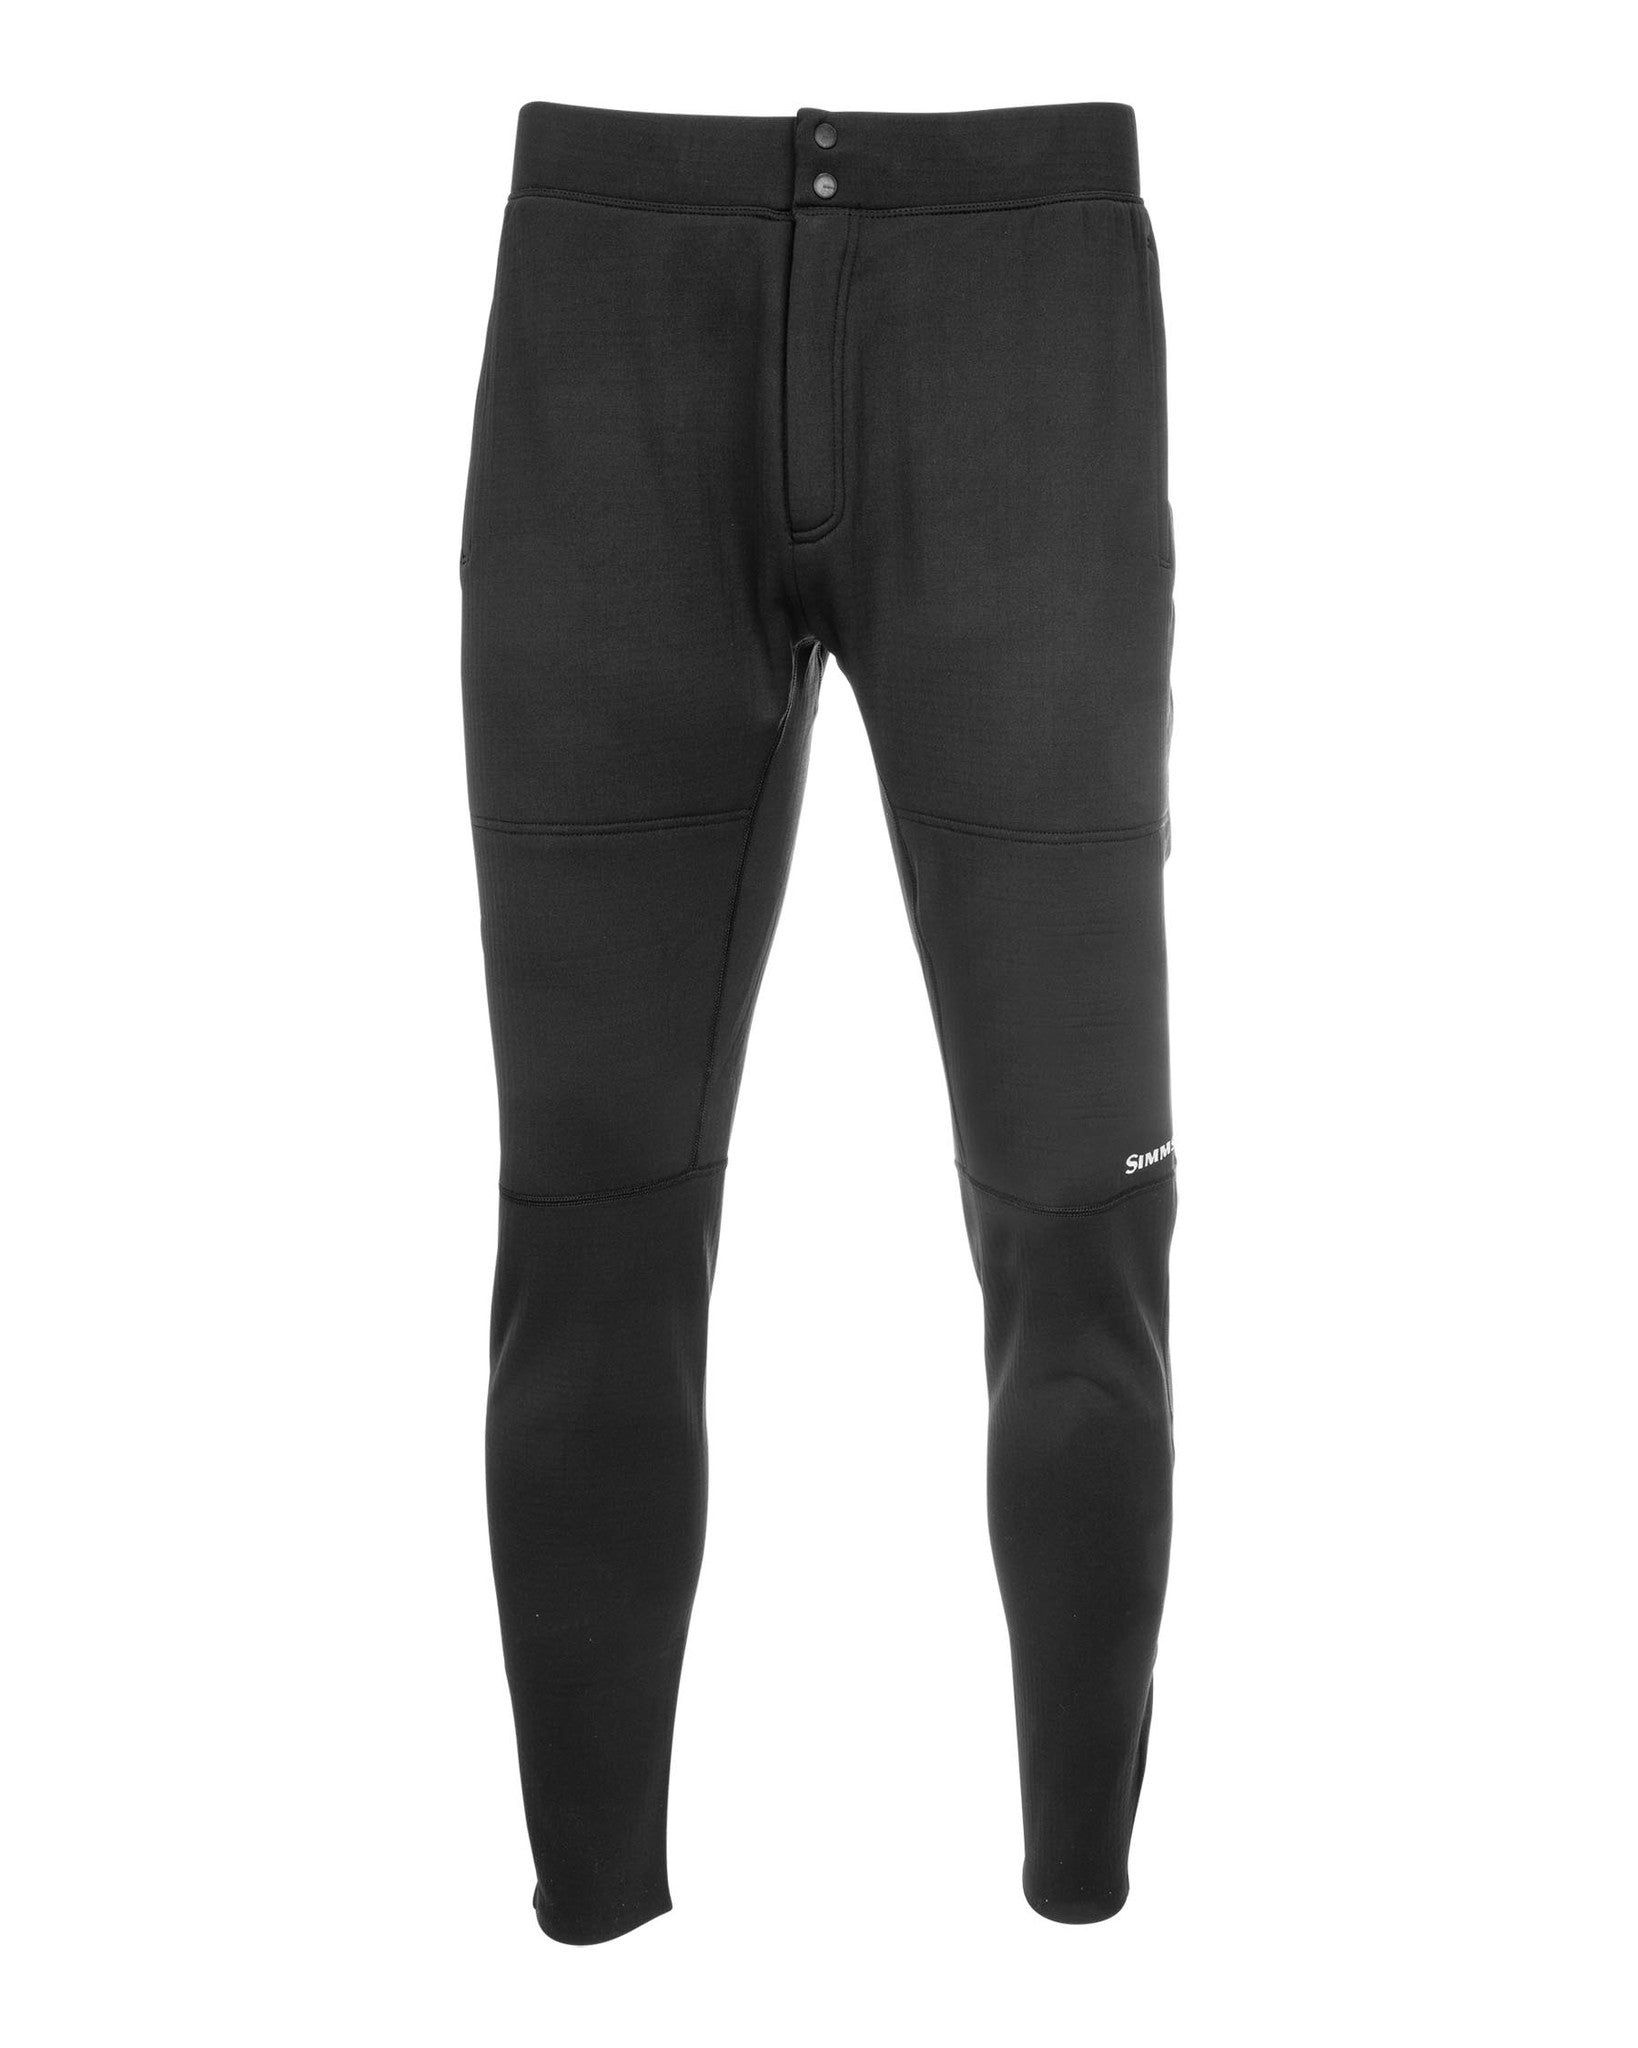 Buy Black Fleece Lined Thermal Tights from Next United Arab Emirates